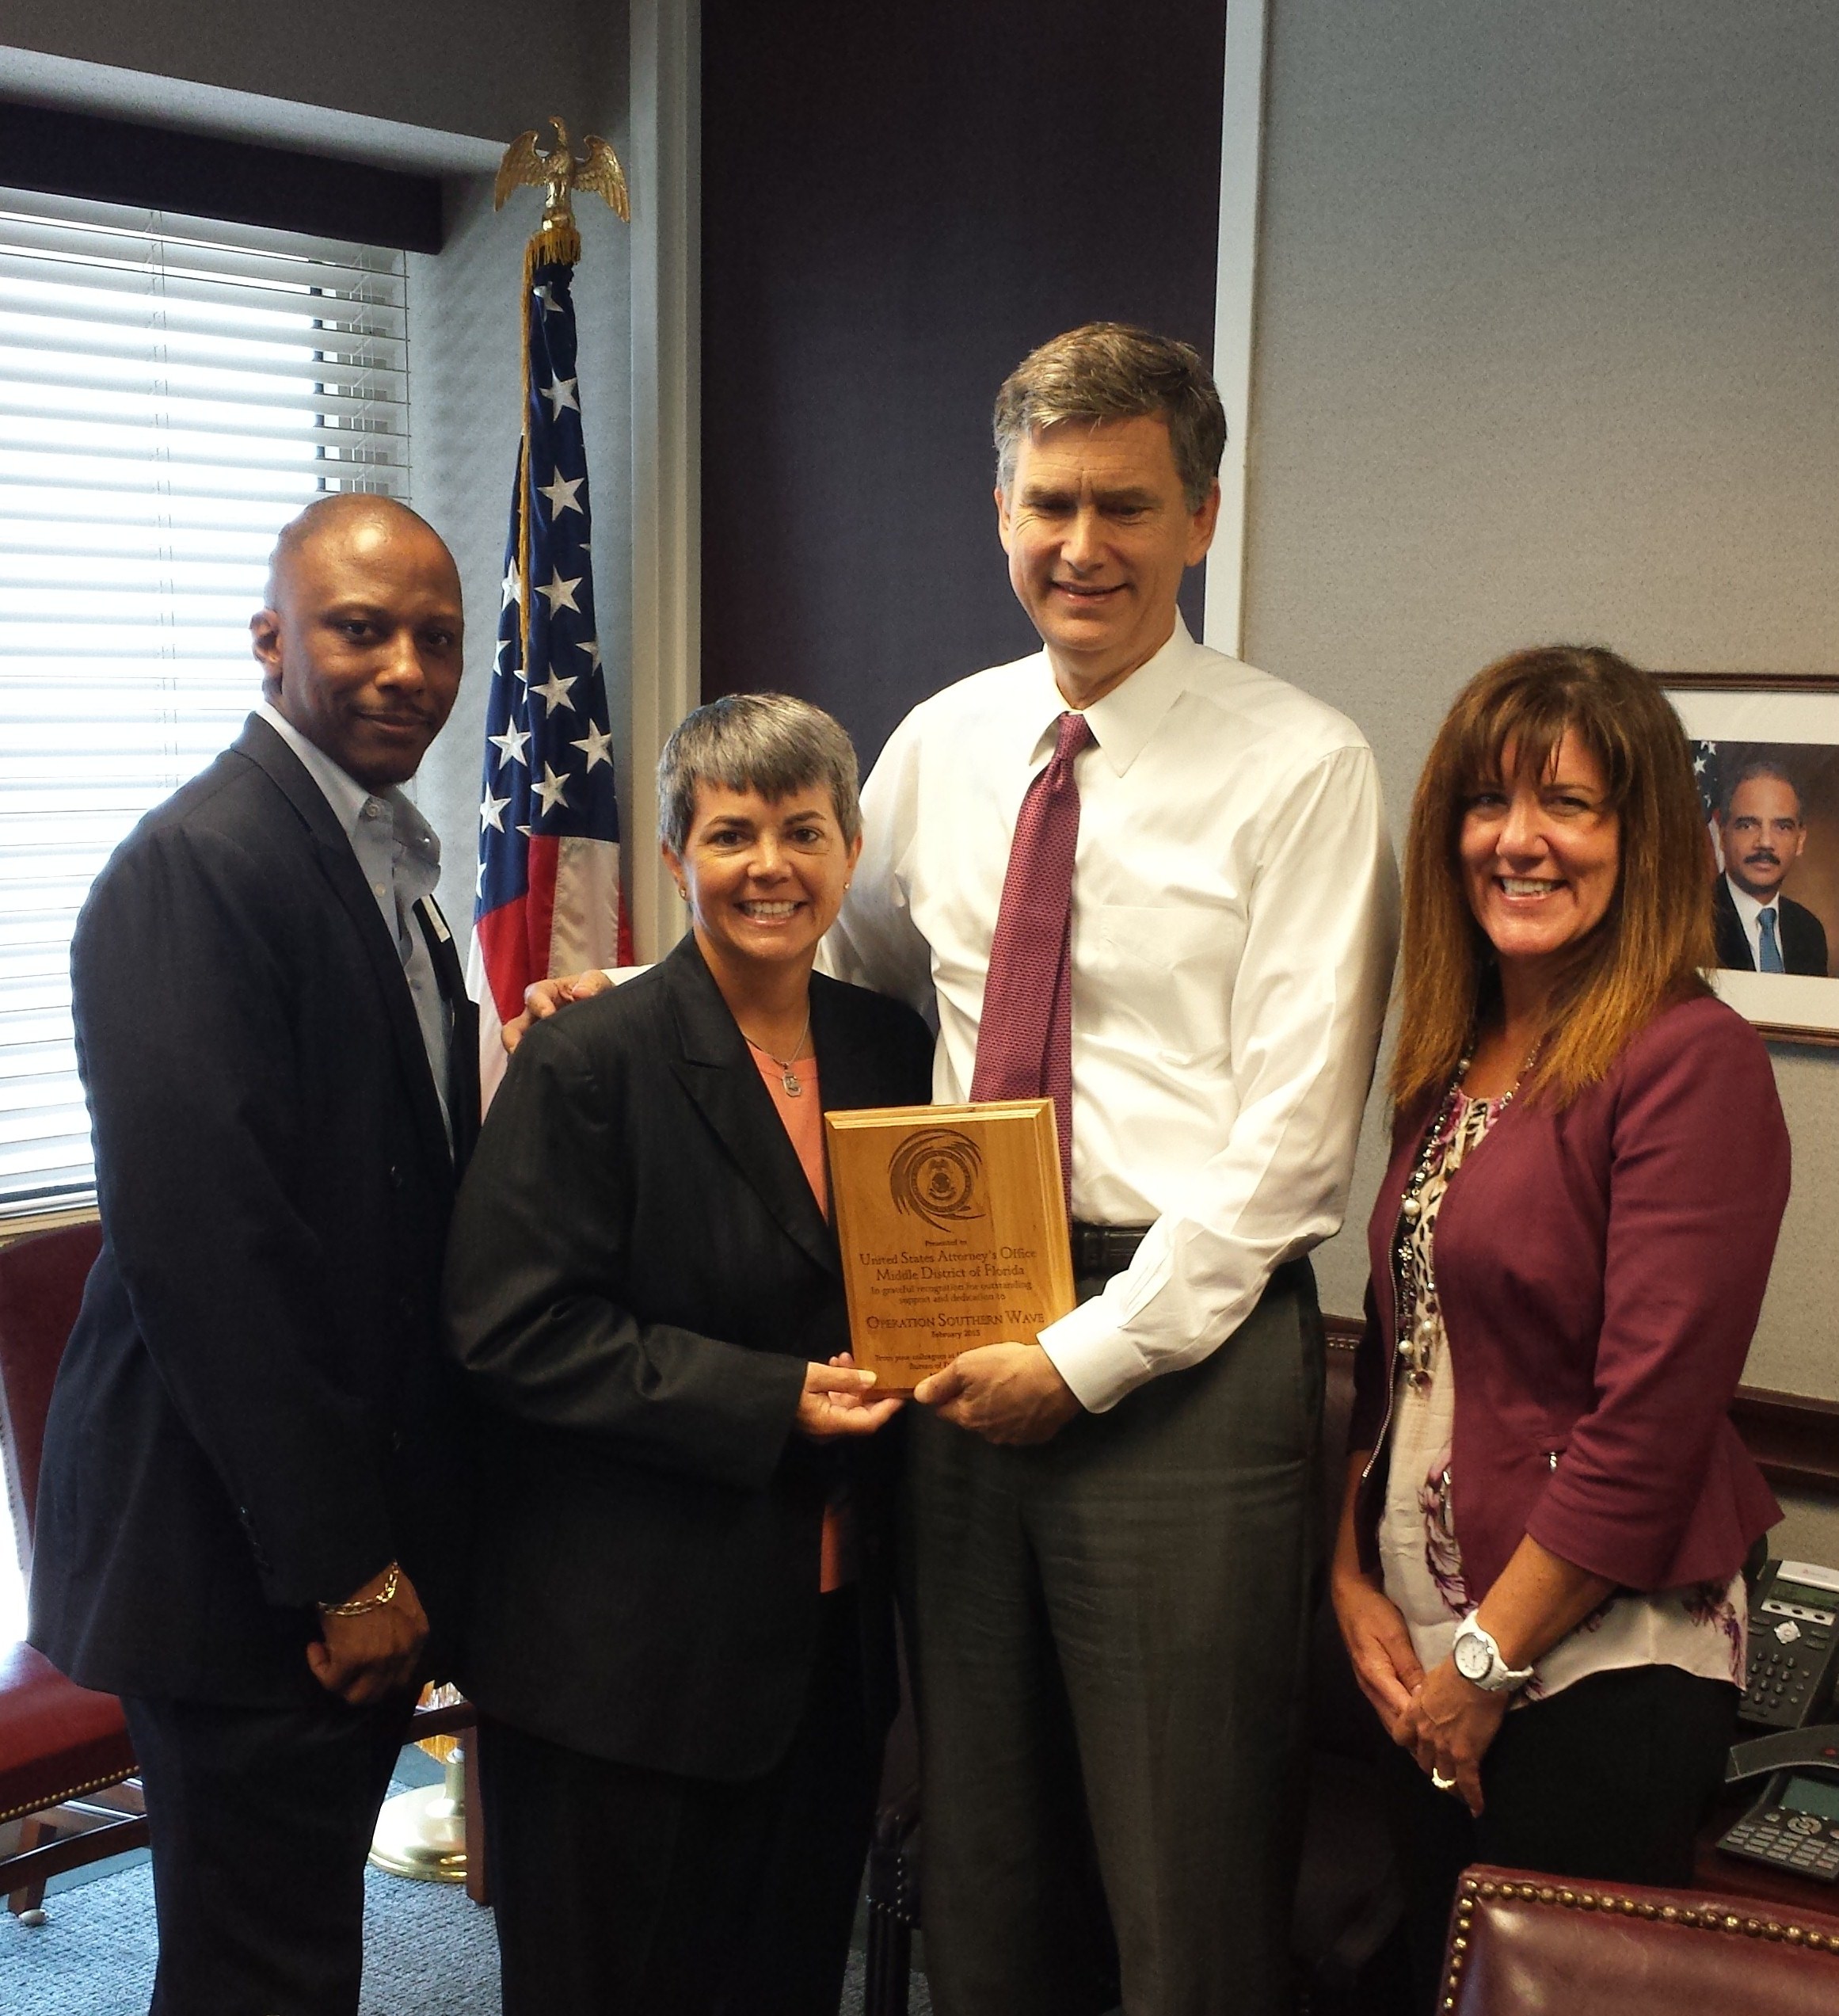 Pictured: U.S. Attorney Lee Bentley is presented with an award